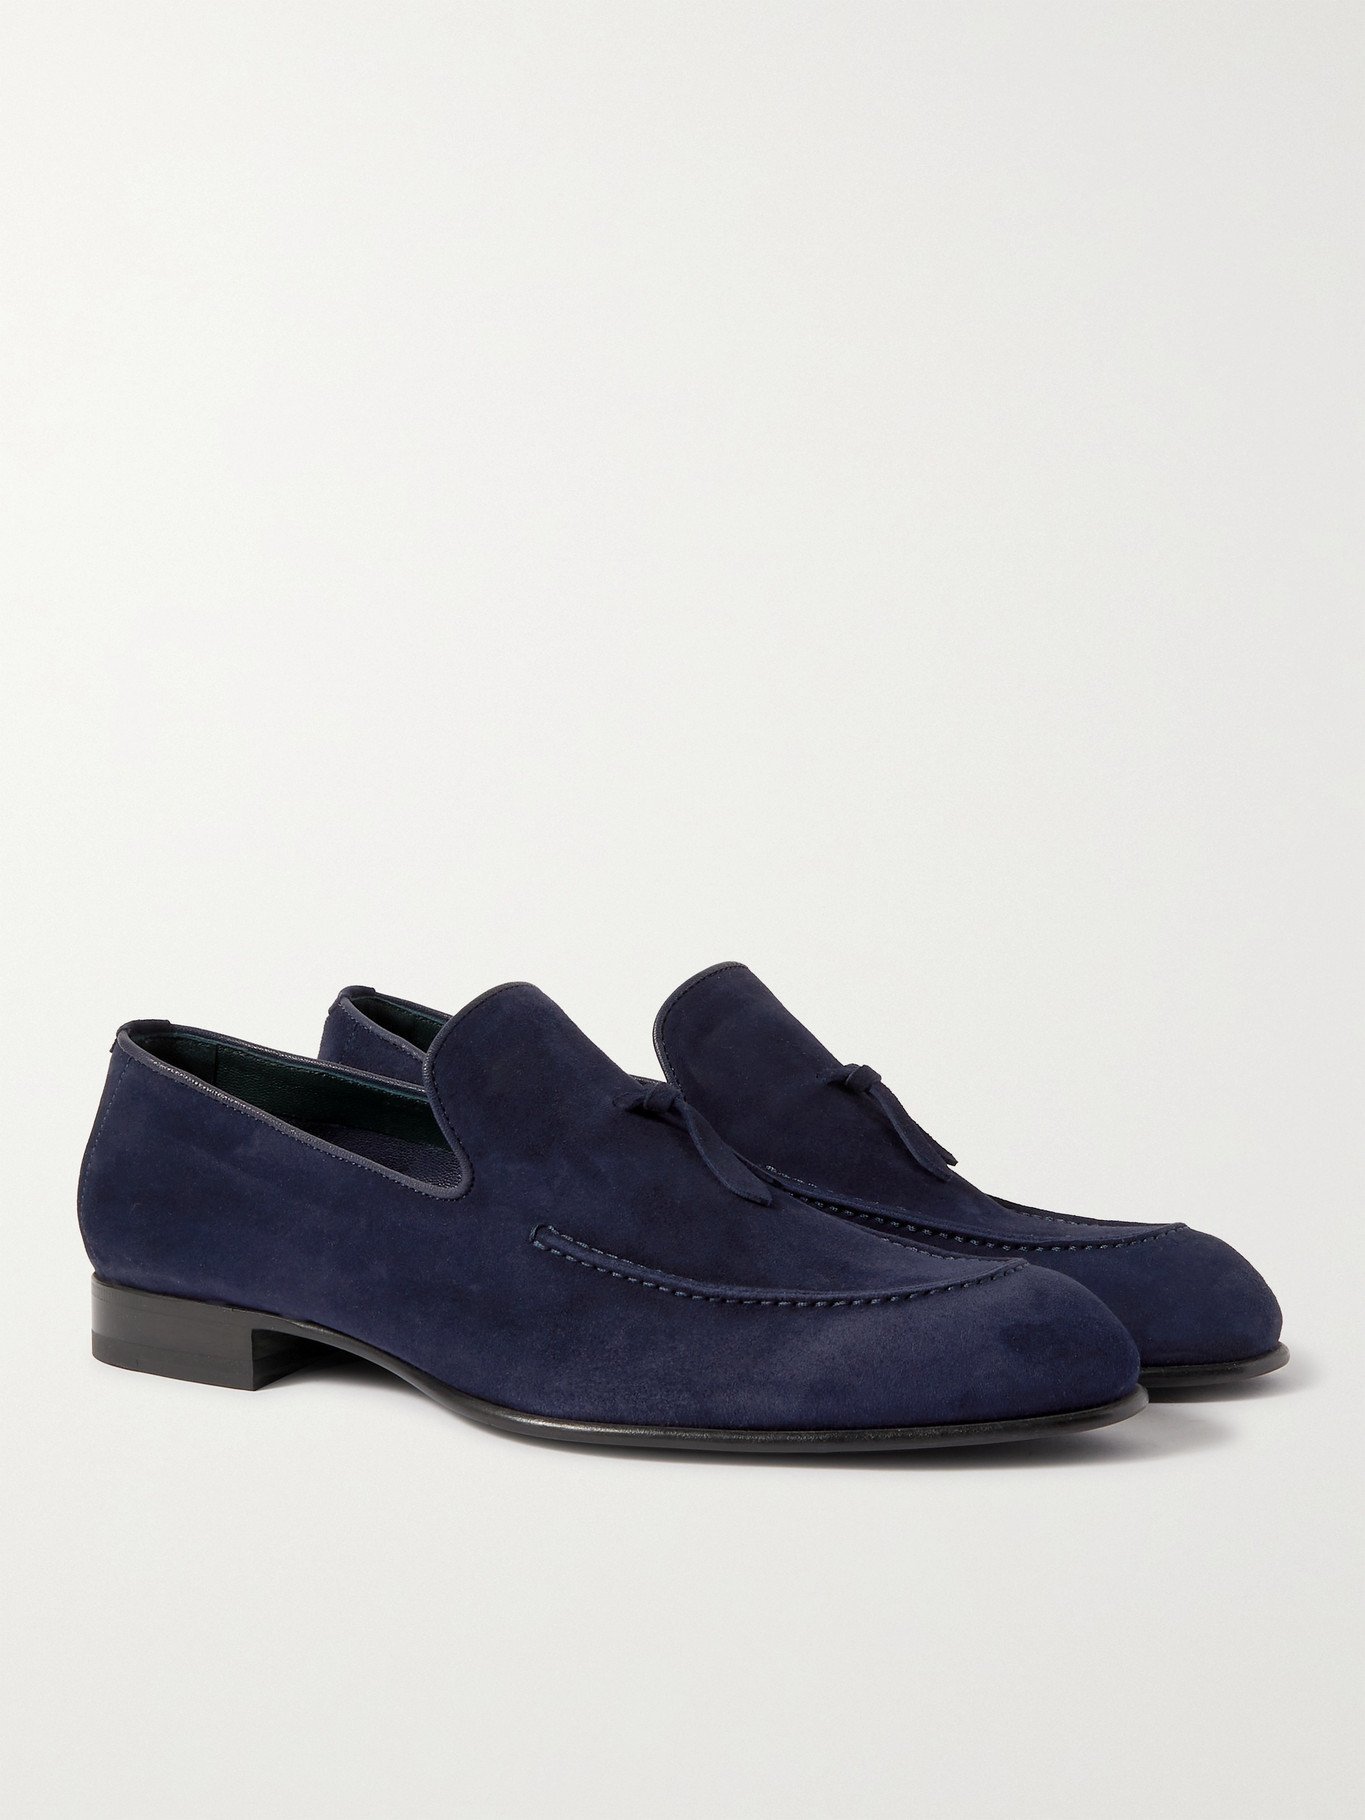 BRIONI - Lukas Leather-Trimmed Suede Tasselled Loafers - Blue Brioni